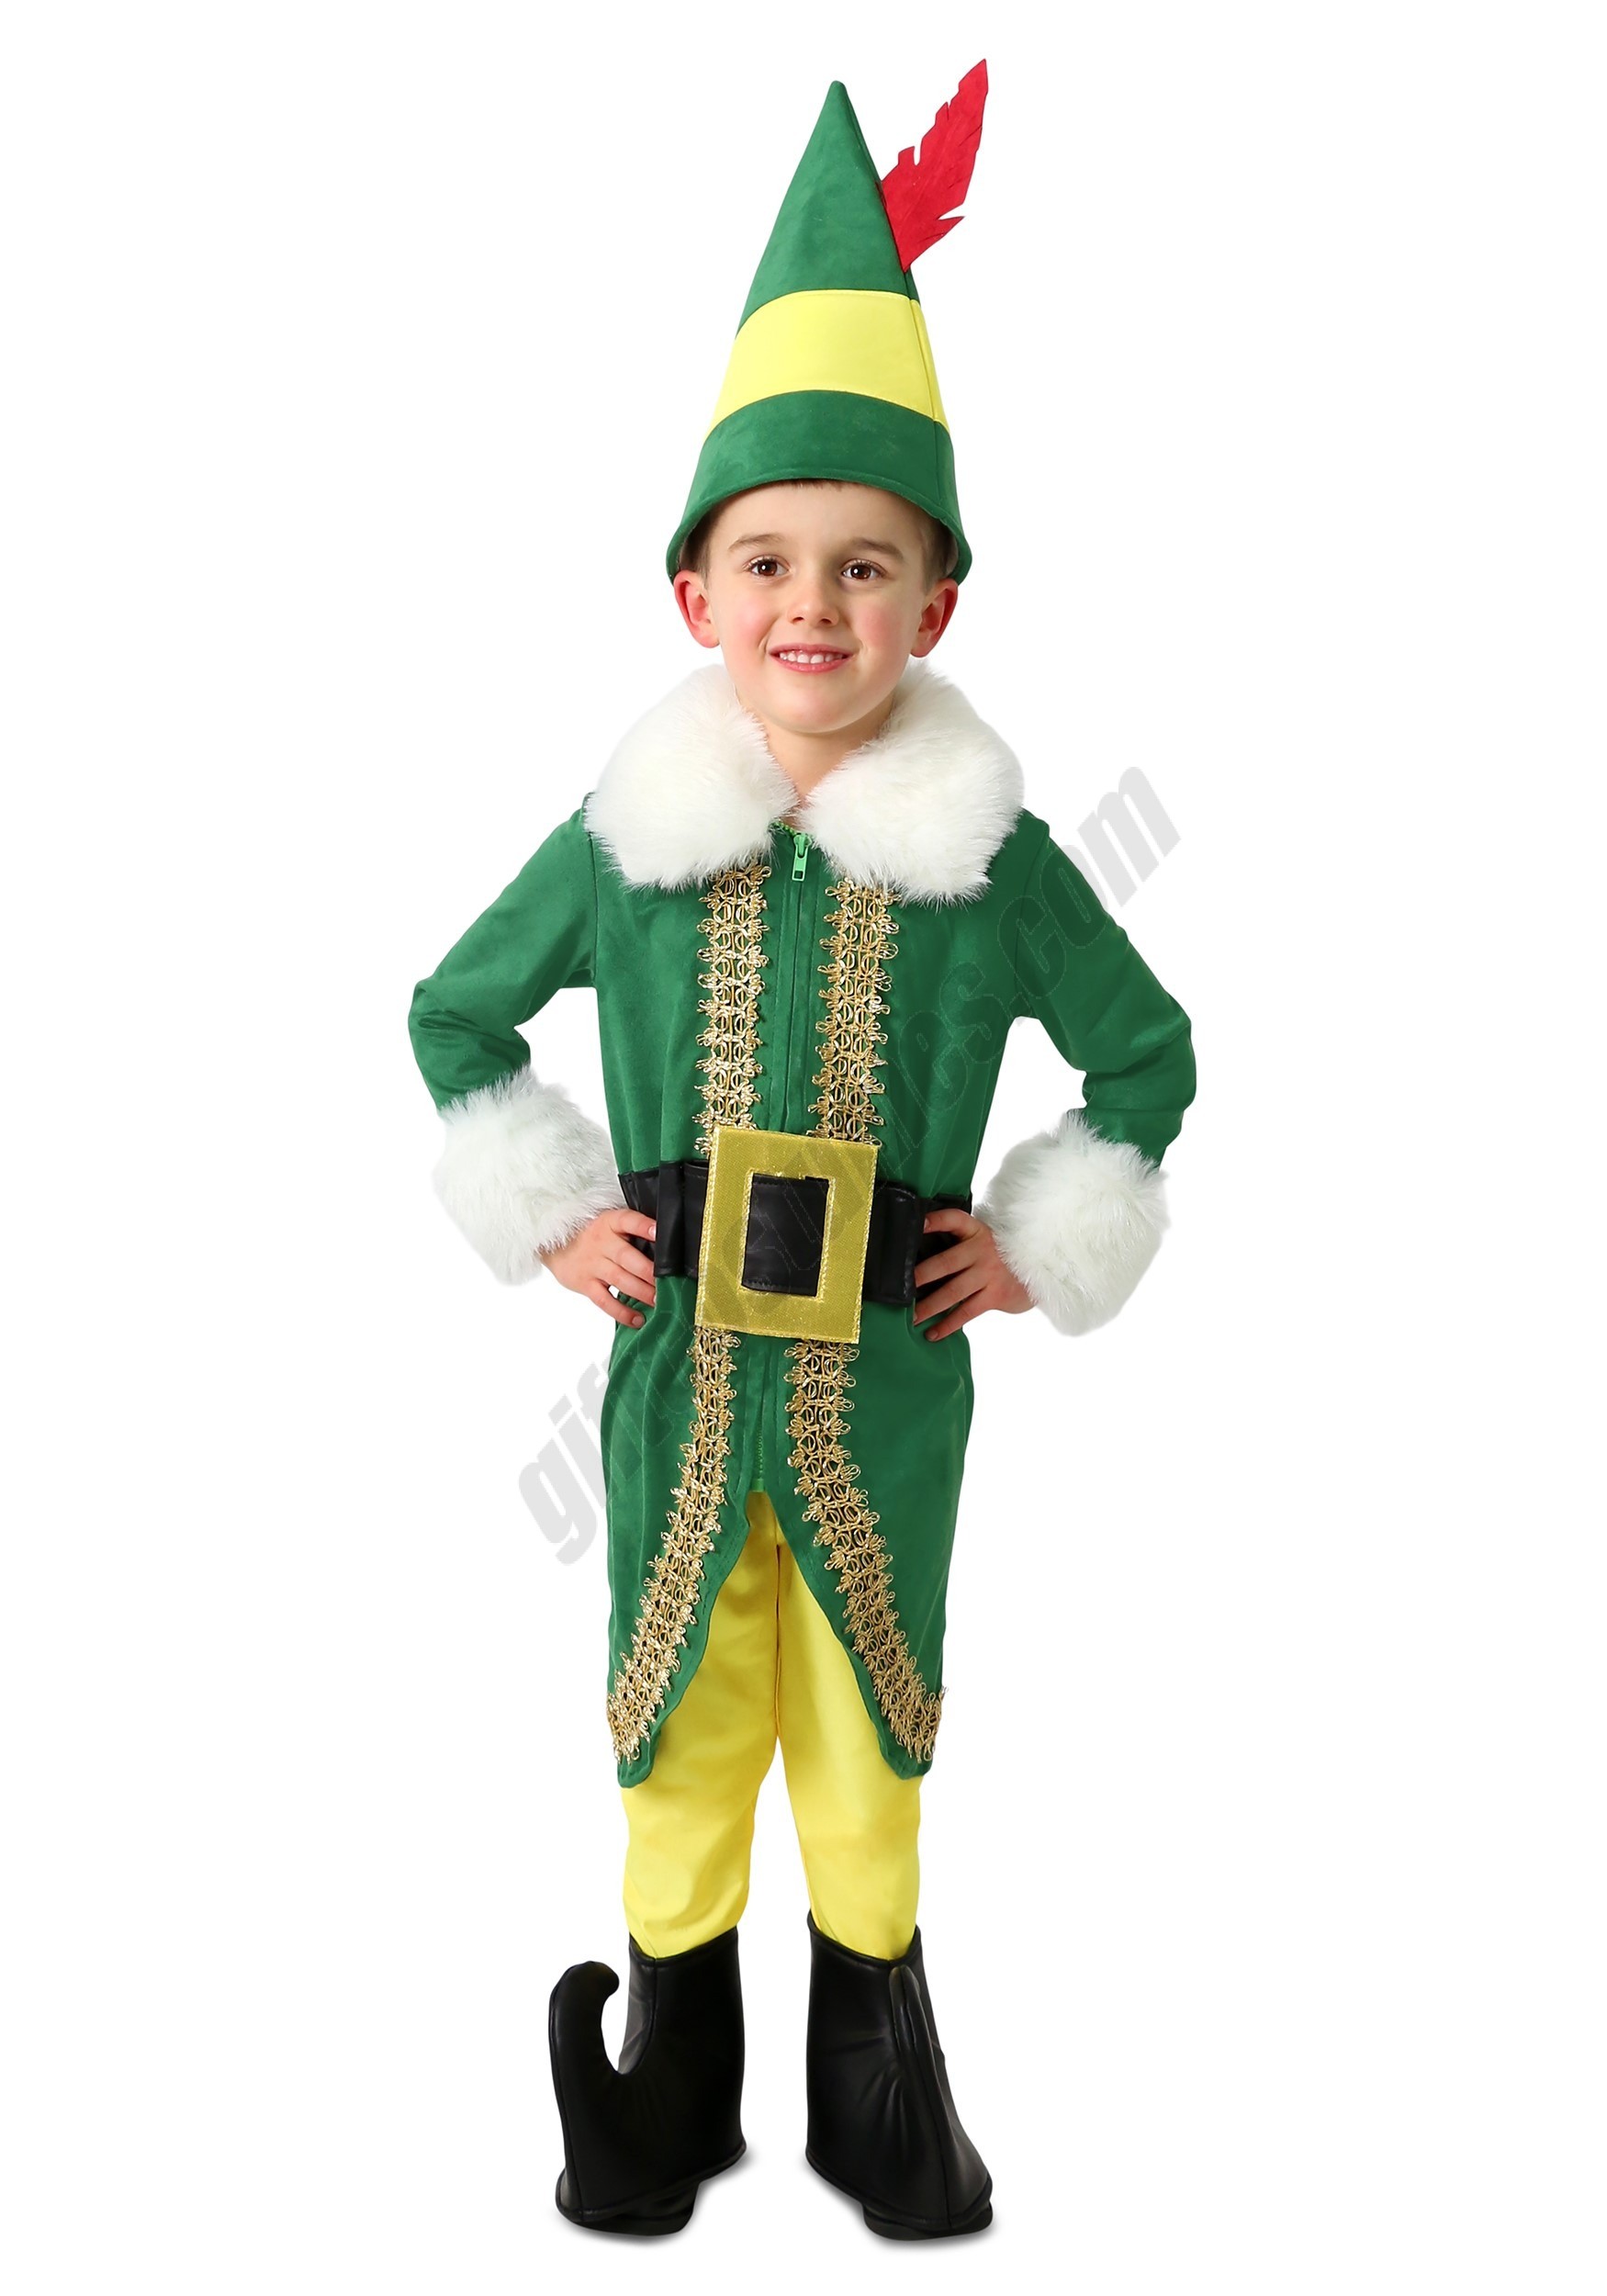 Buddy the Elf Deluxe Costume  for Kids Promotions - Buddy the Elf Deluxe Costume  for Kids Promotions